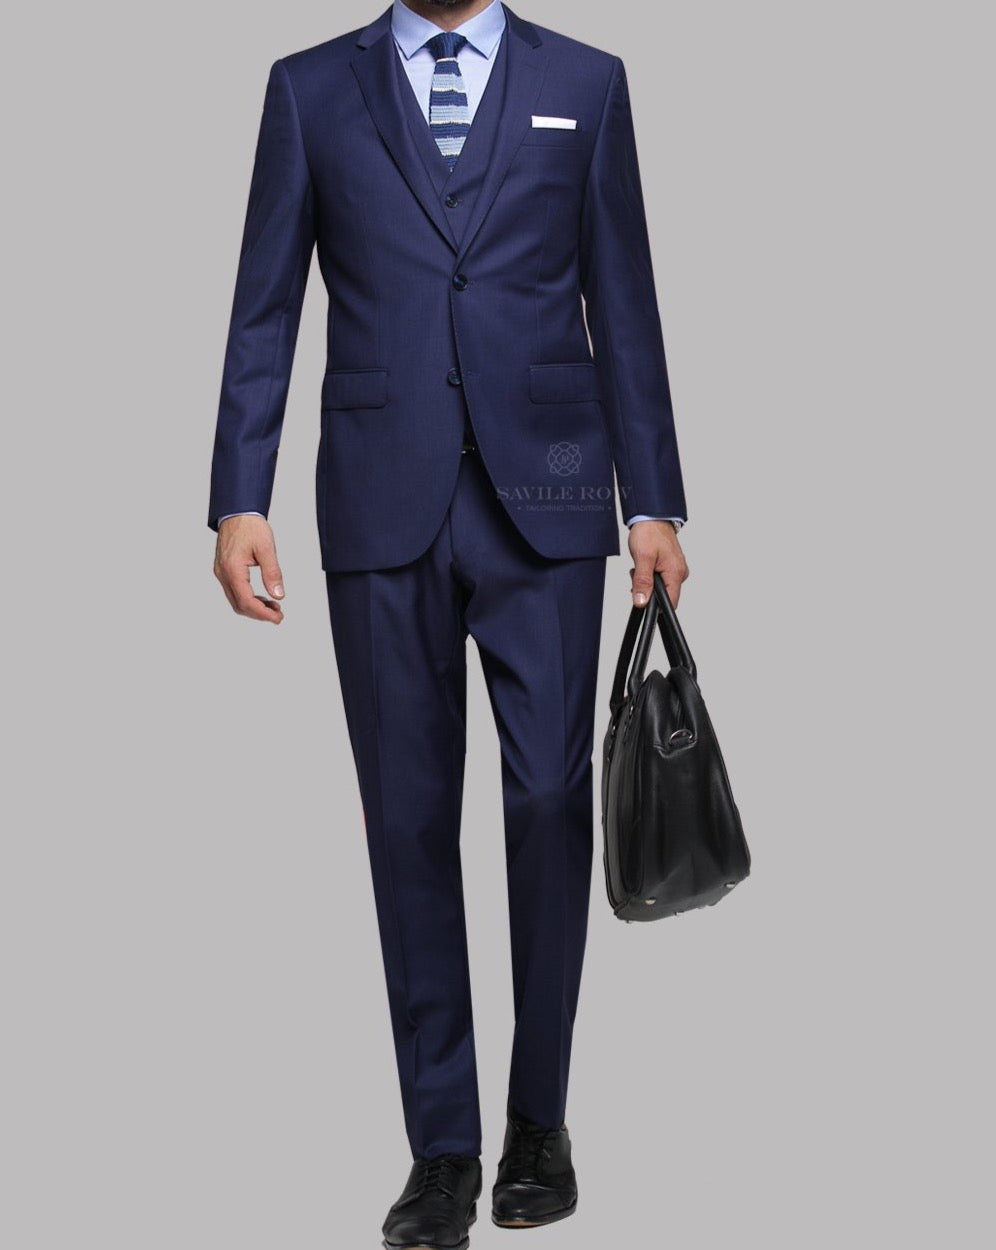 Savile Row pure wool trousers in rich cobalt blue worn with the Savile Row  cobalt trousers 